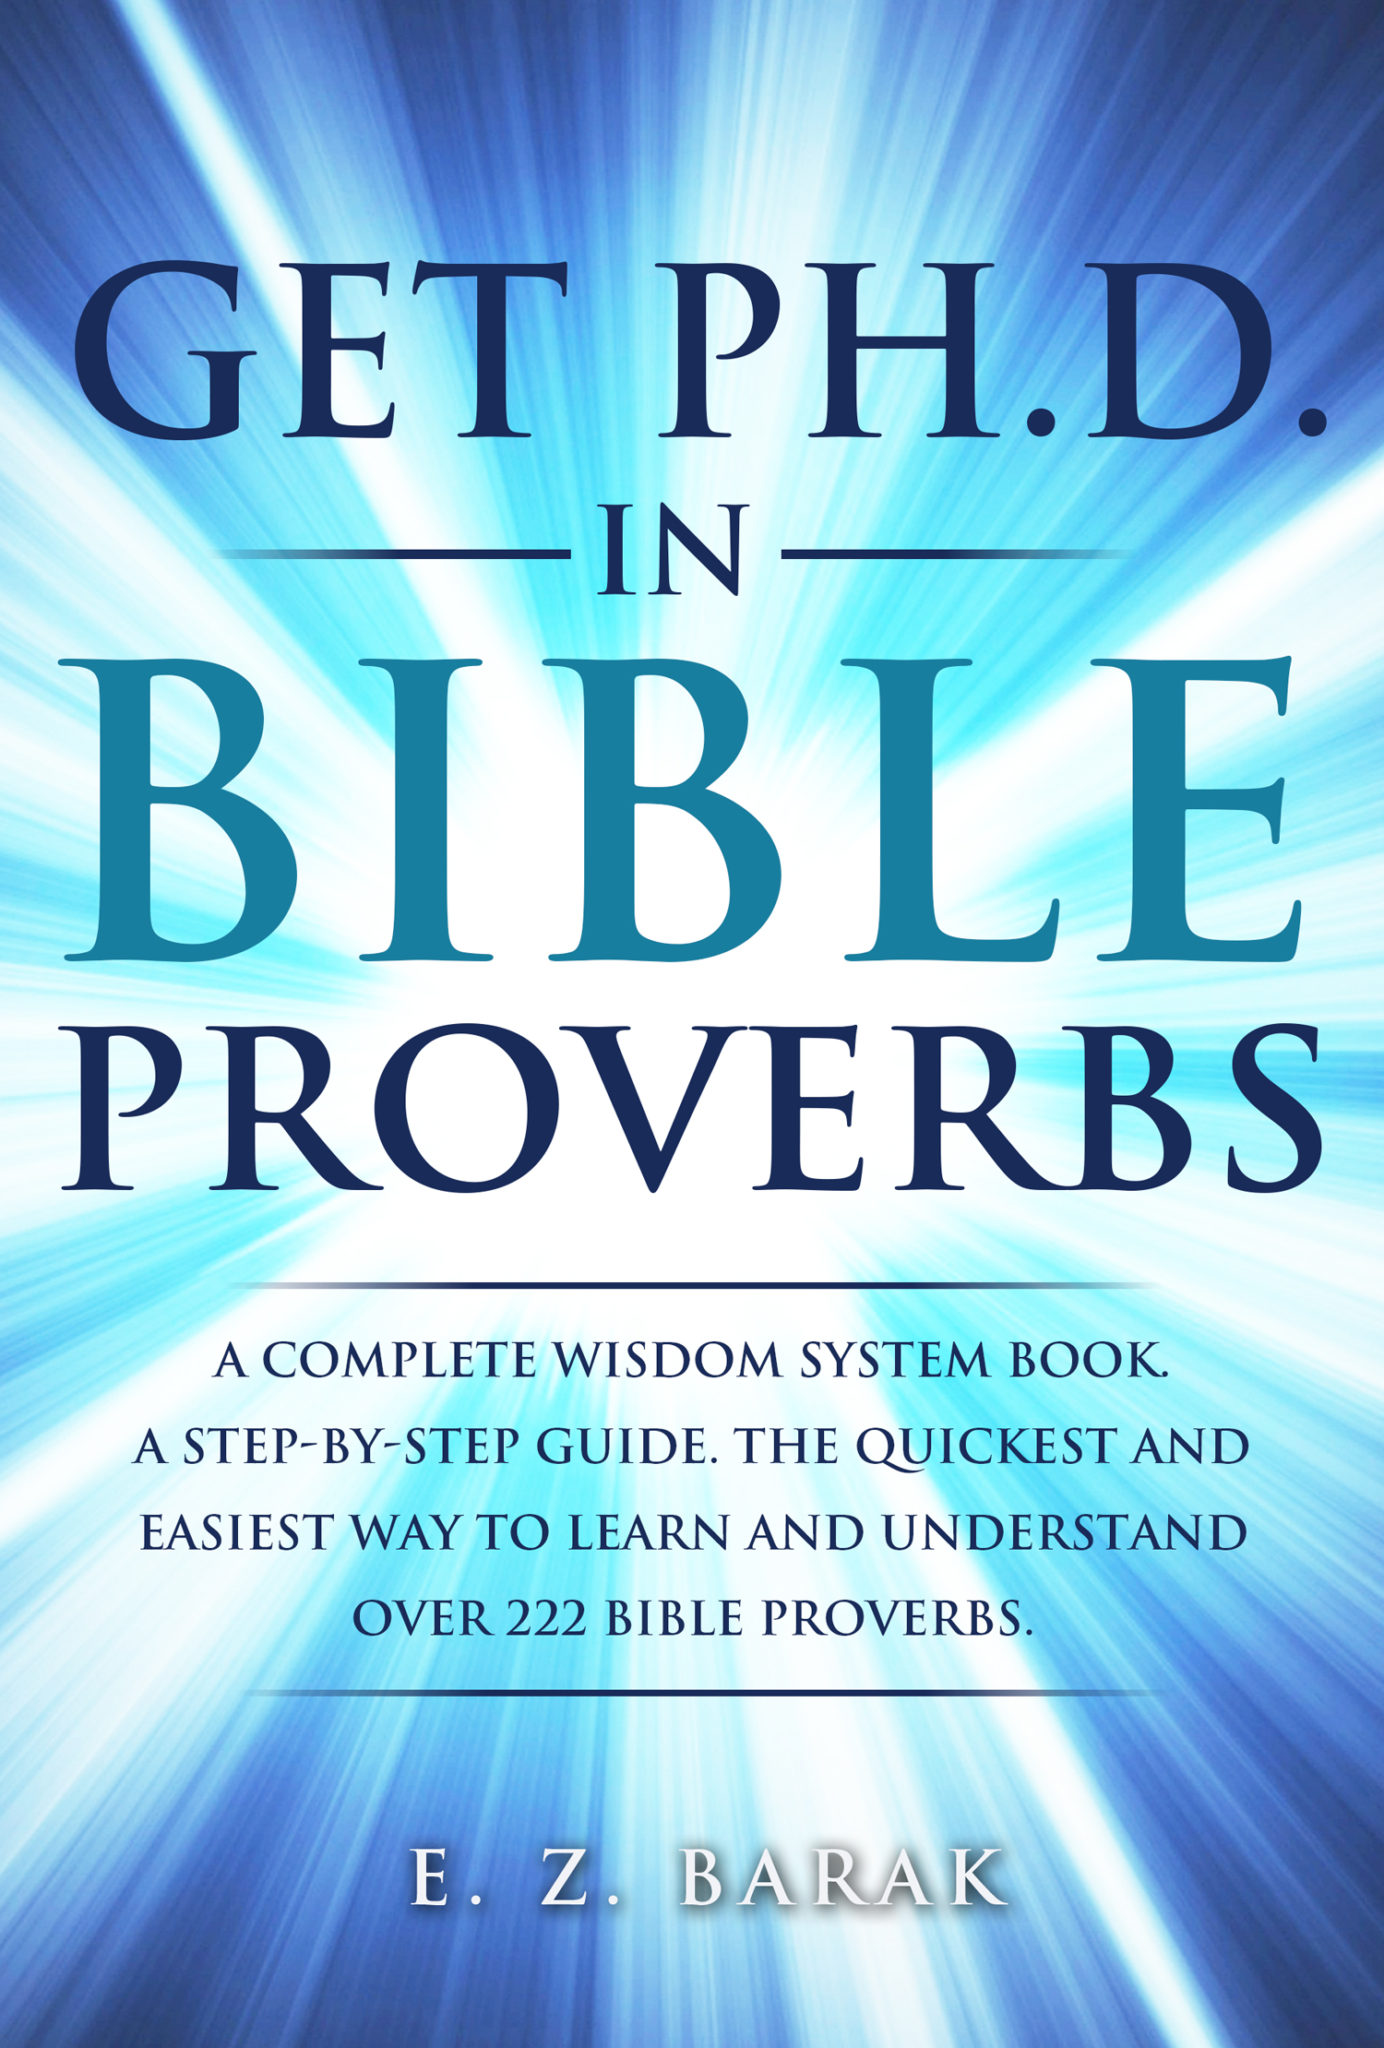 FREE: Get Ph.D. in Bible Proverbs by E. Z. Barak